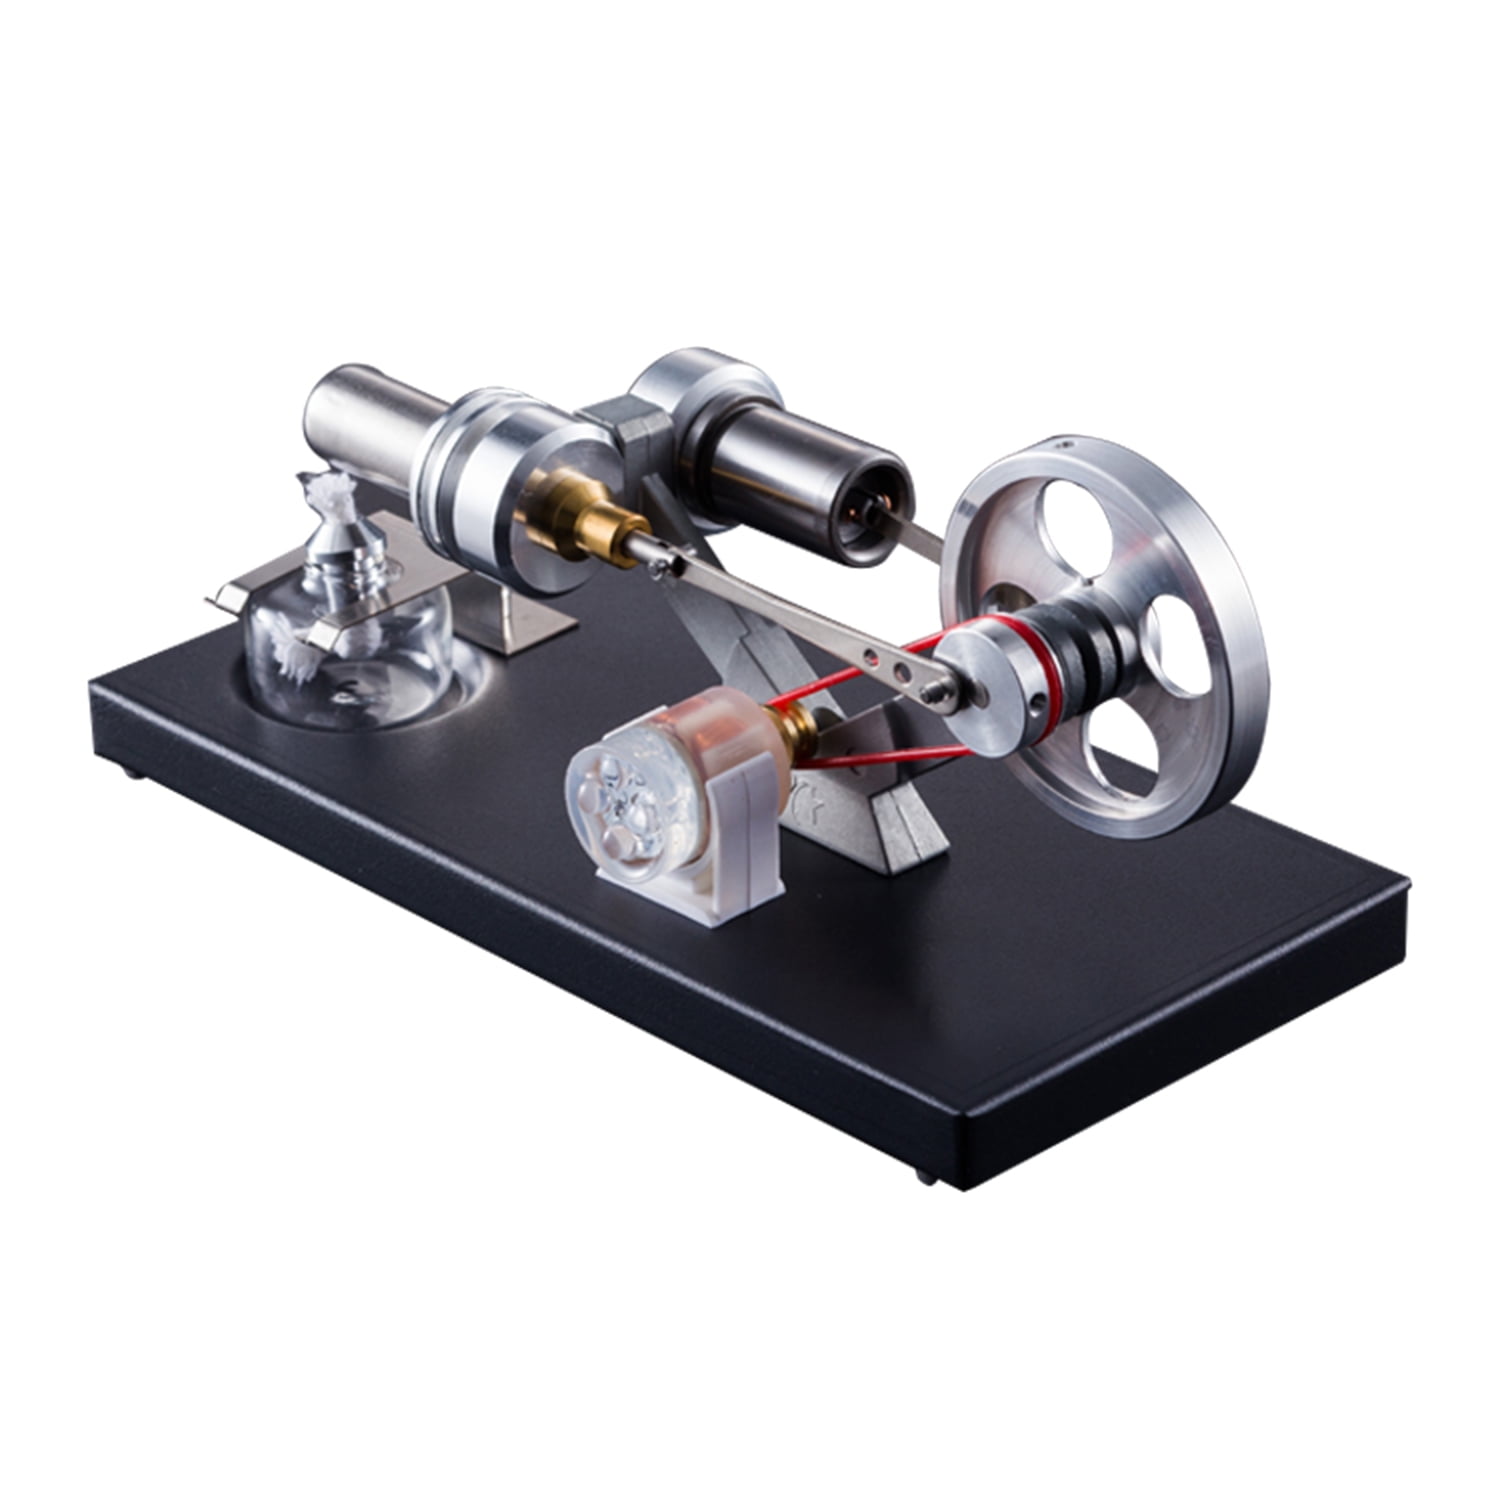 Powerful Hot Air Stirling Engine Model Generator Science Machine Collection 